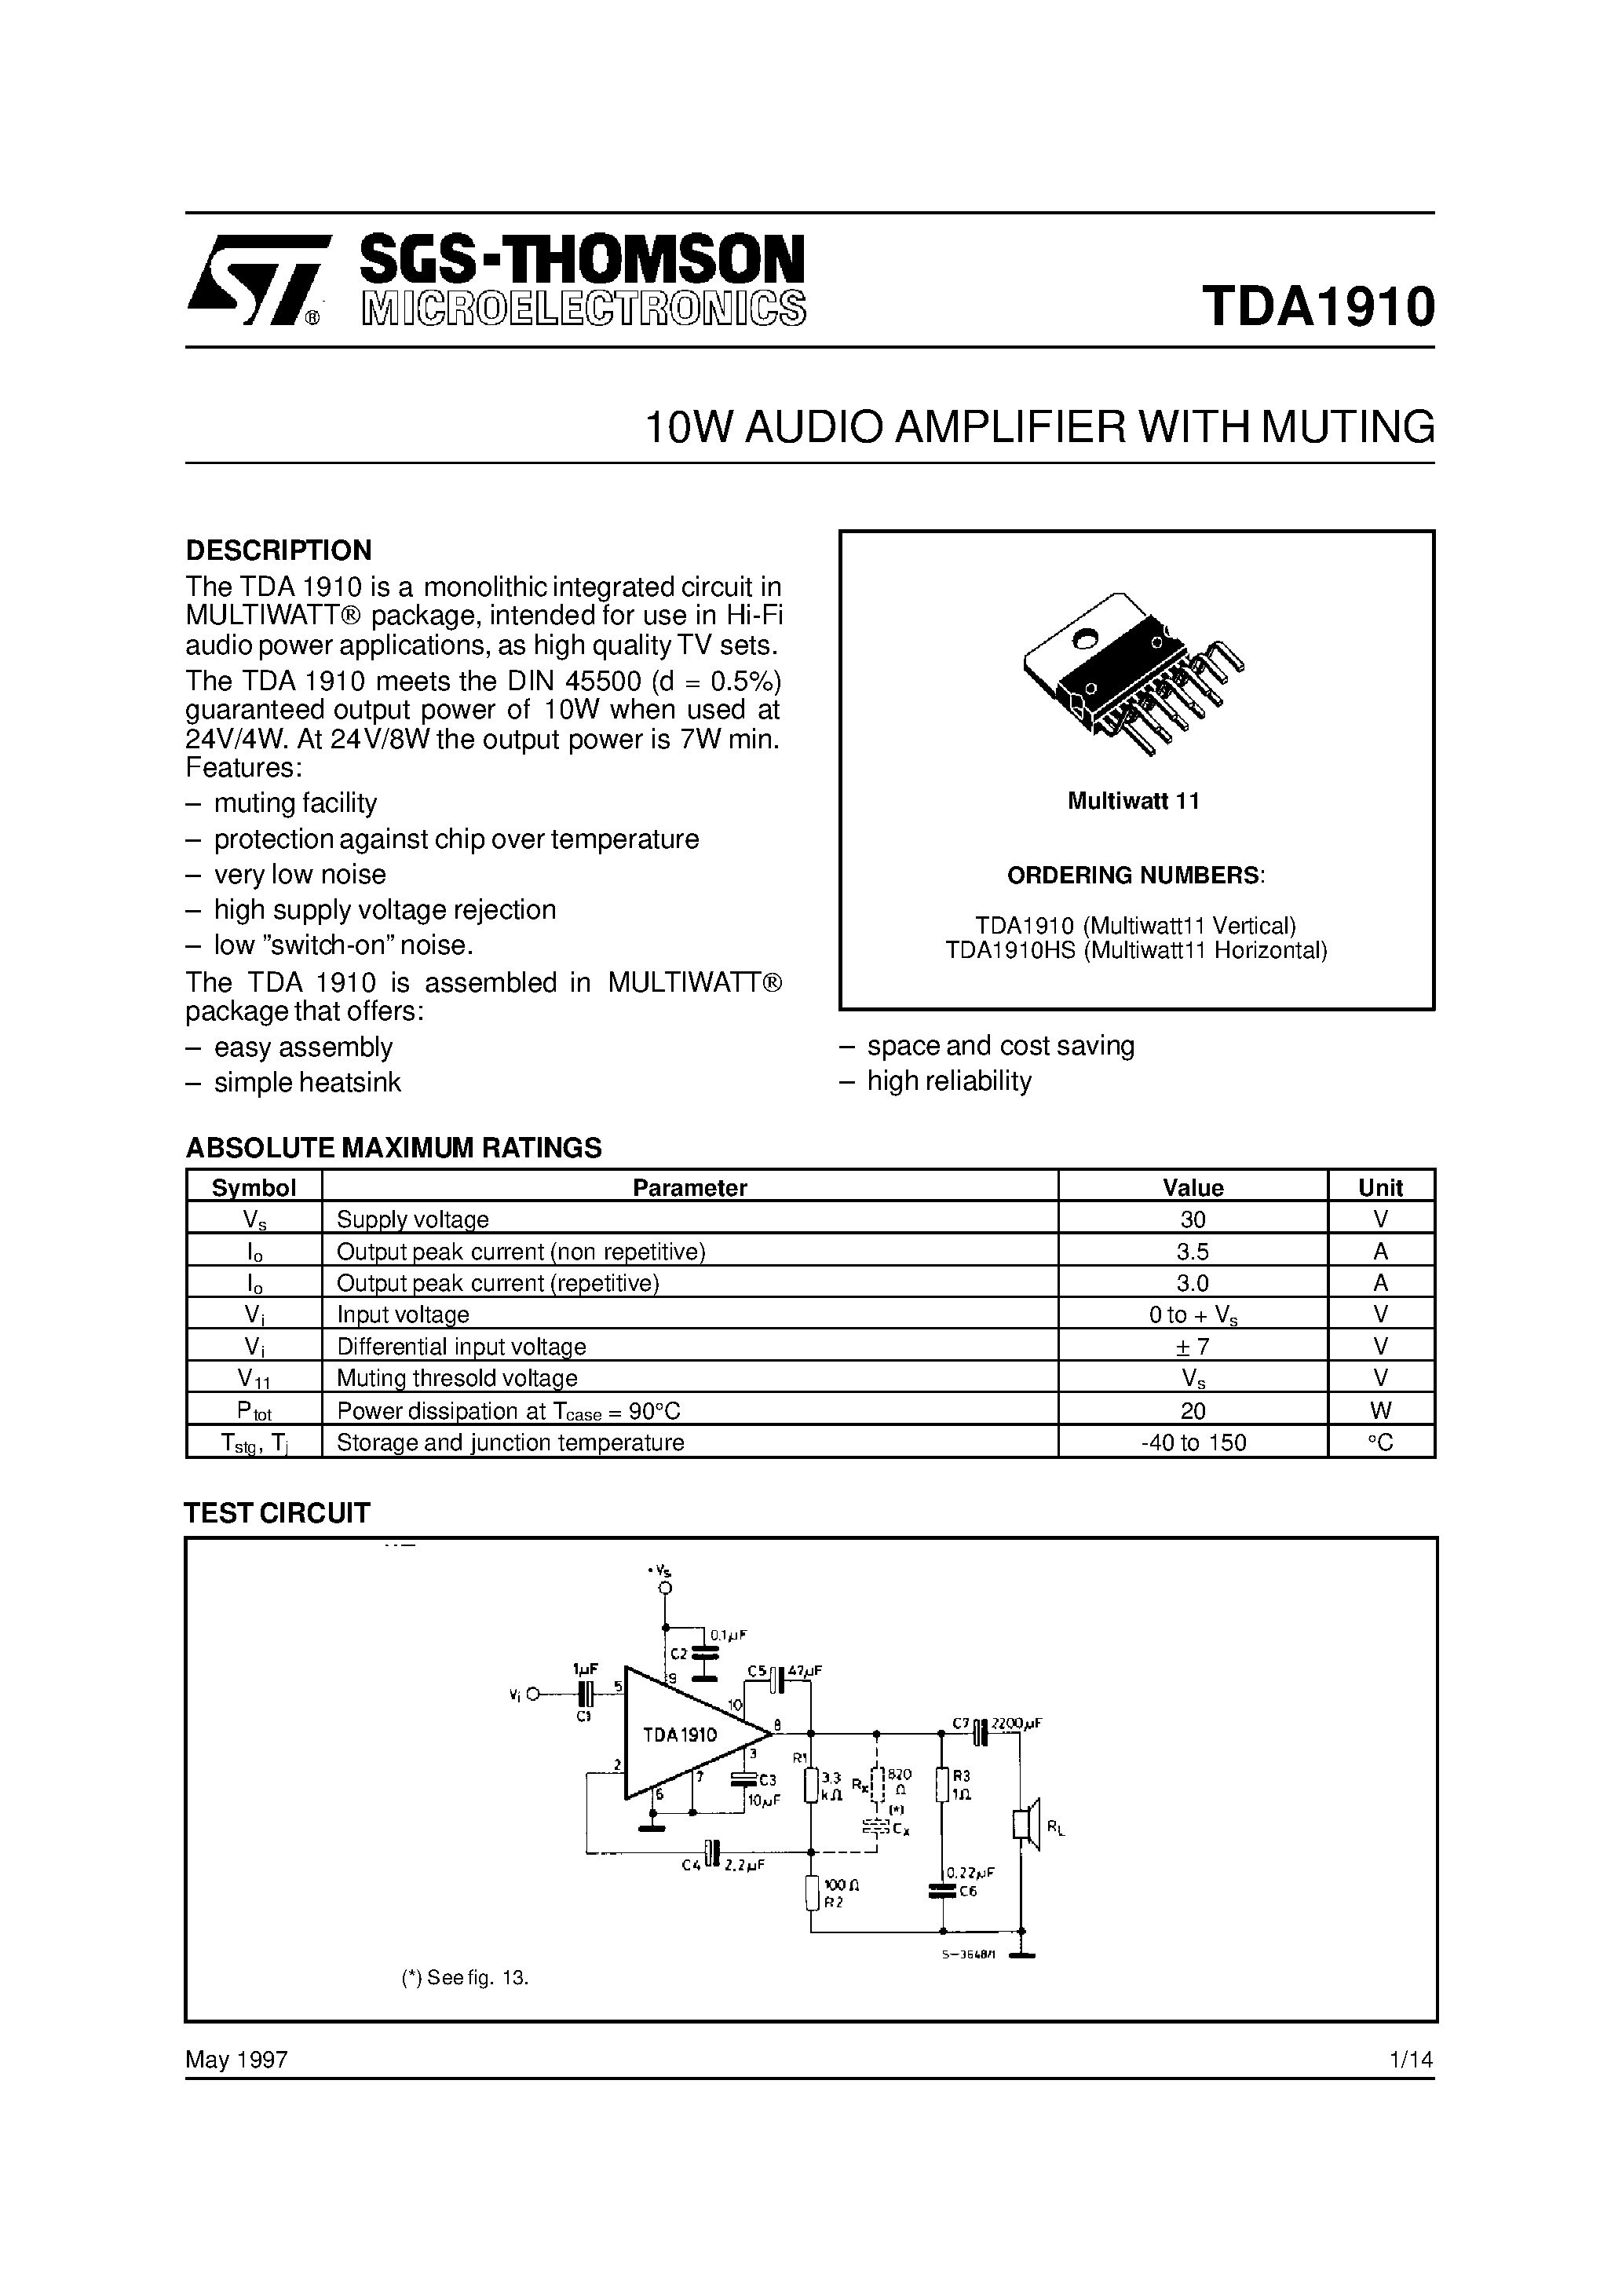 Datasheet TDA1910HS - 10W AUDIO AMPLIFIER WITH MUTING page 1